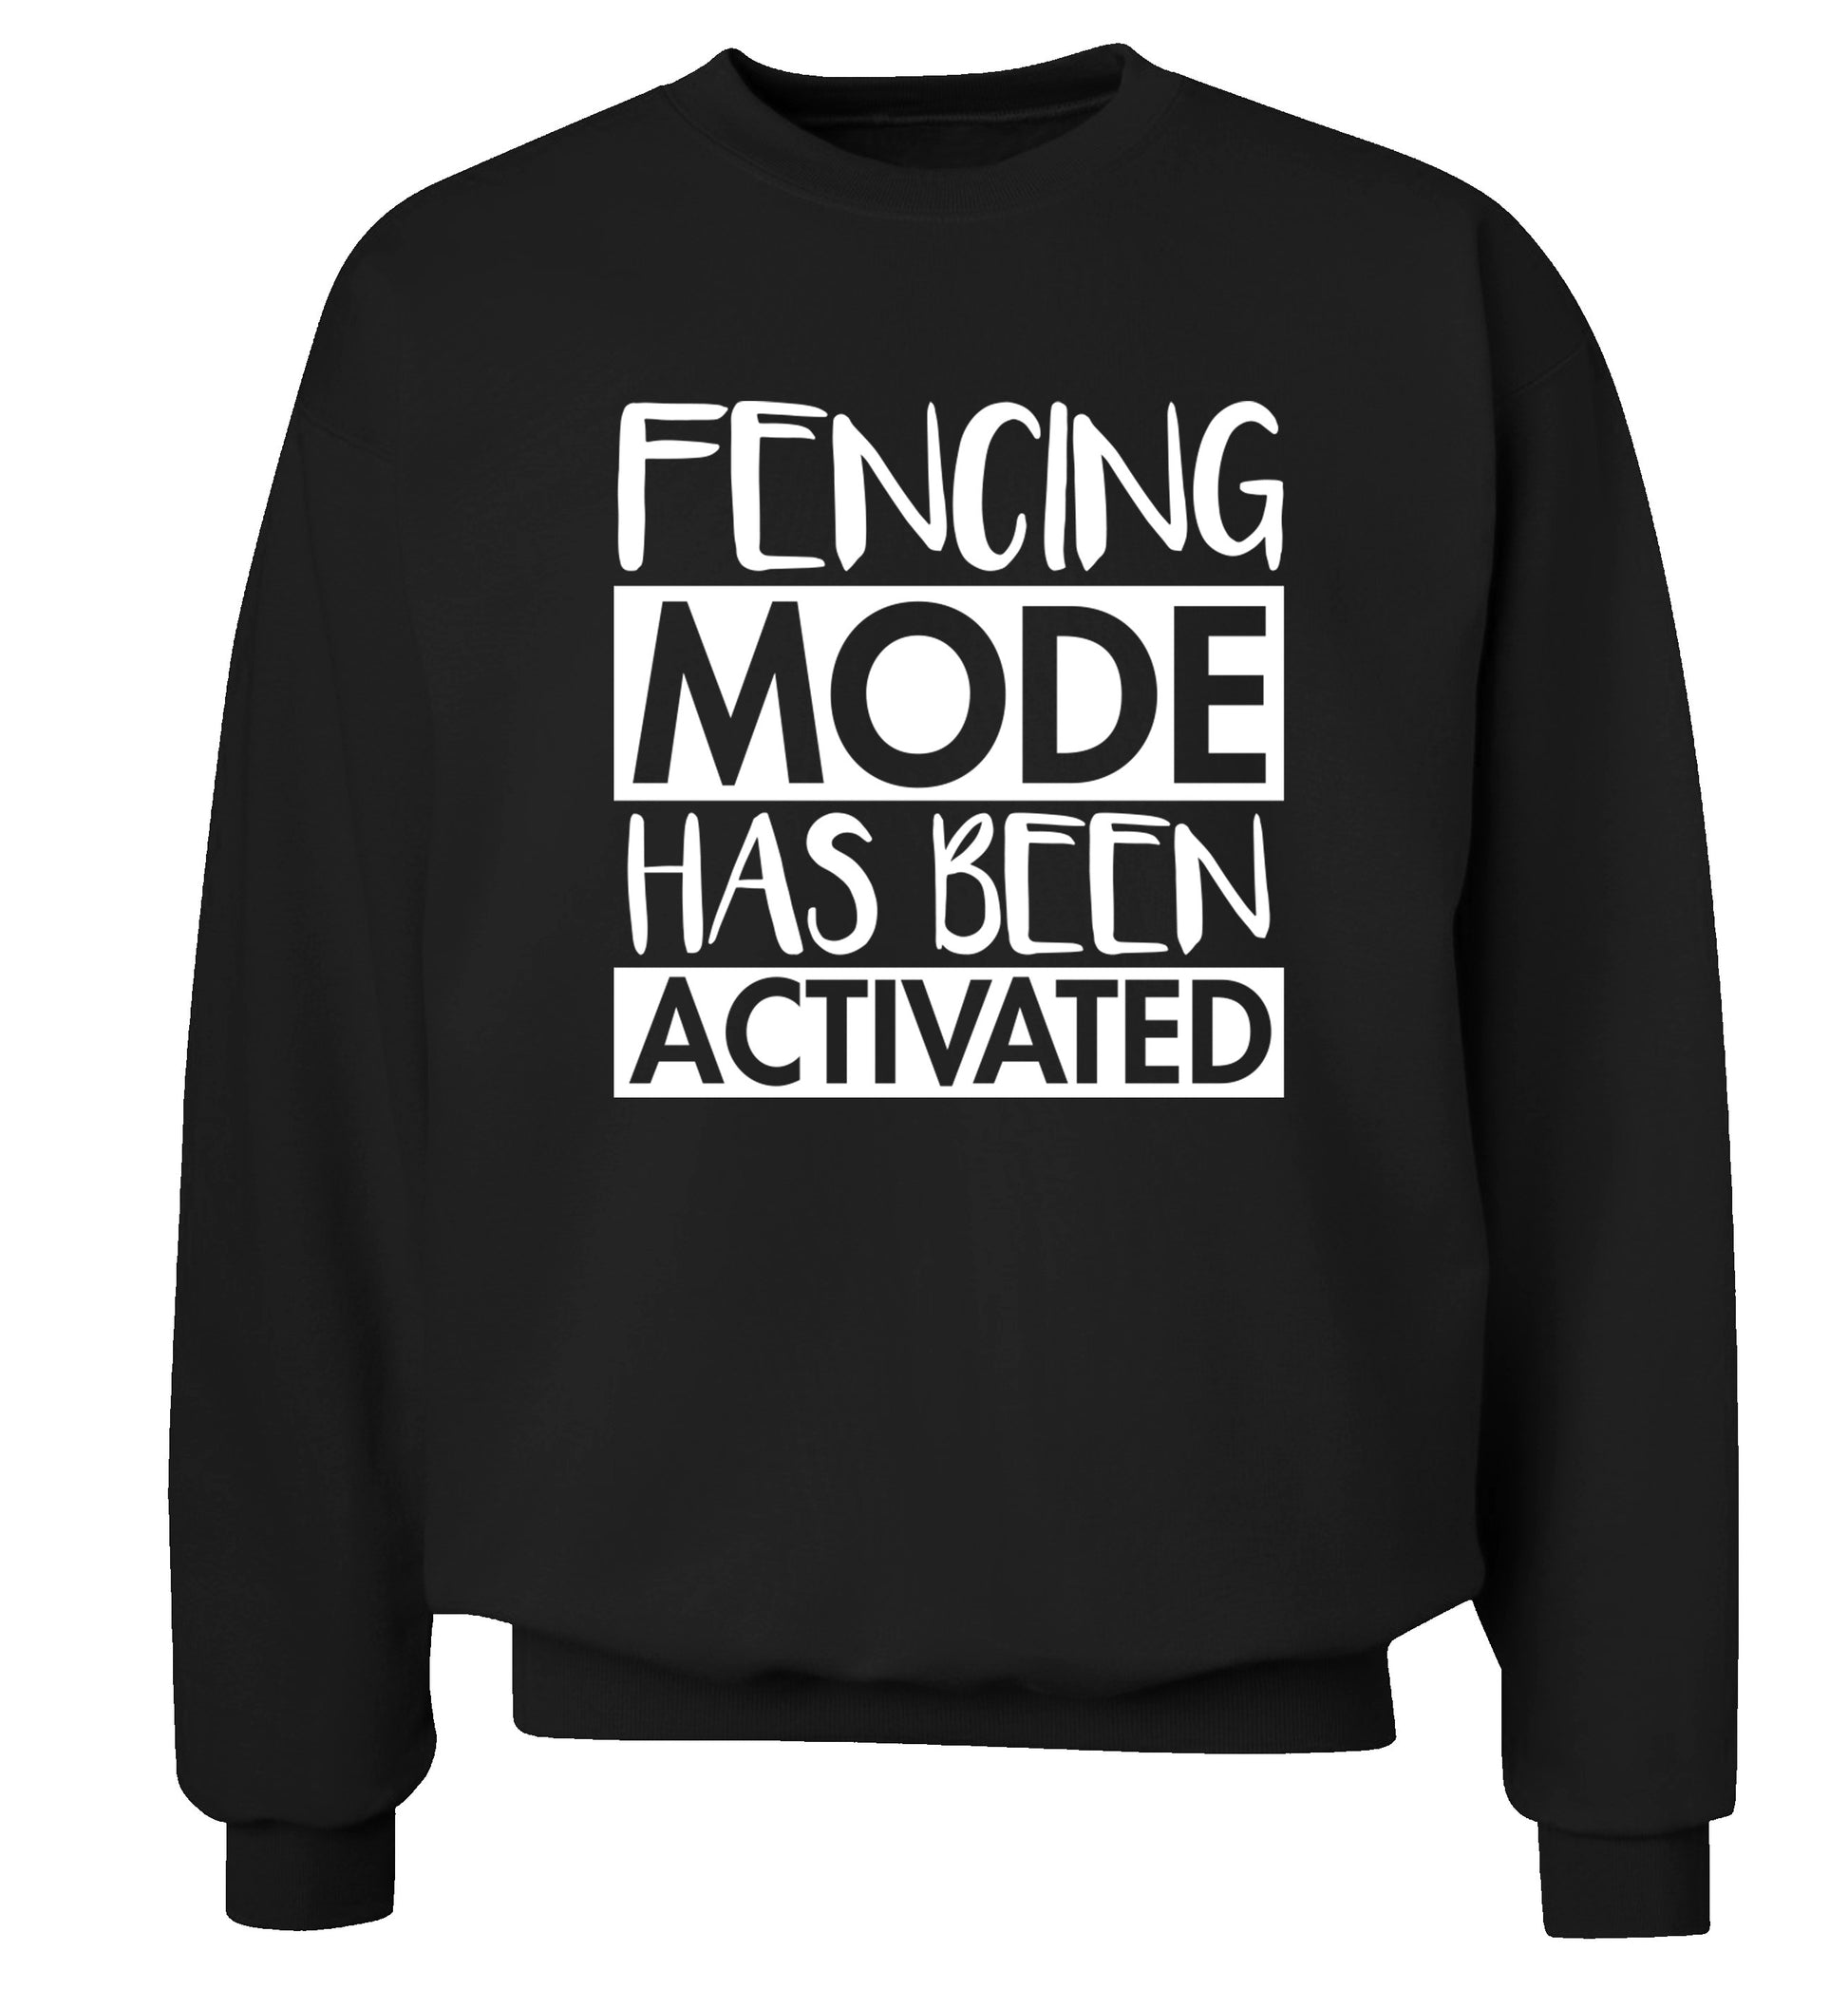 Fencing mode activated Adult's unisex black Sweater 2XL